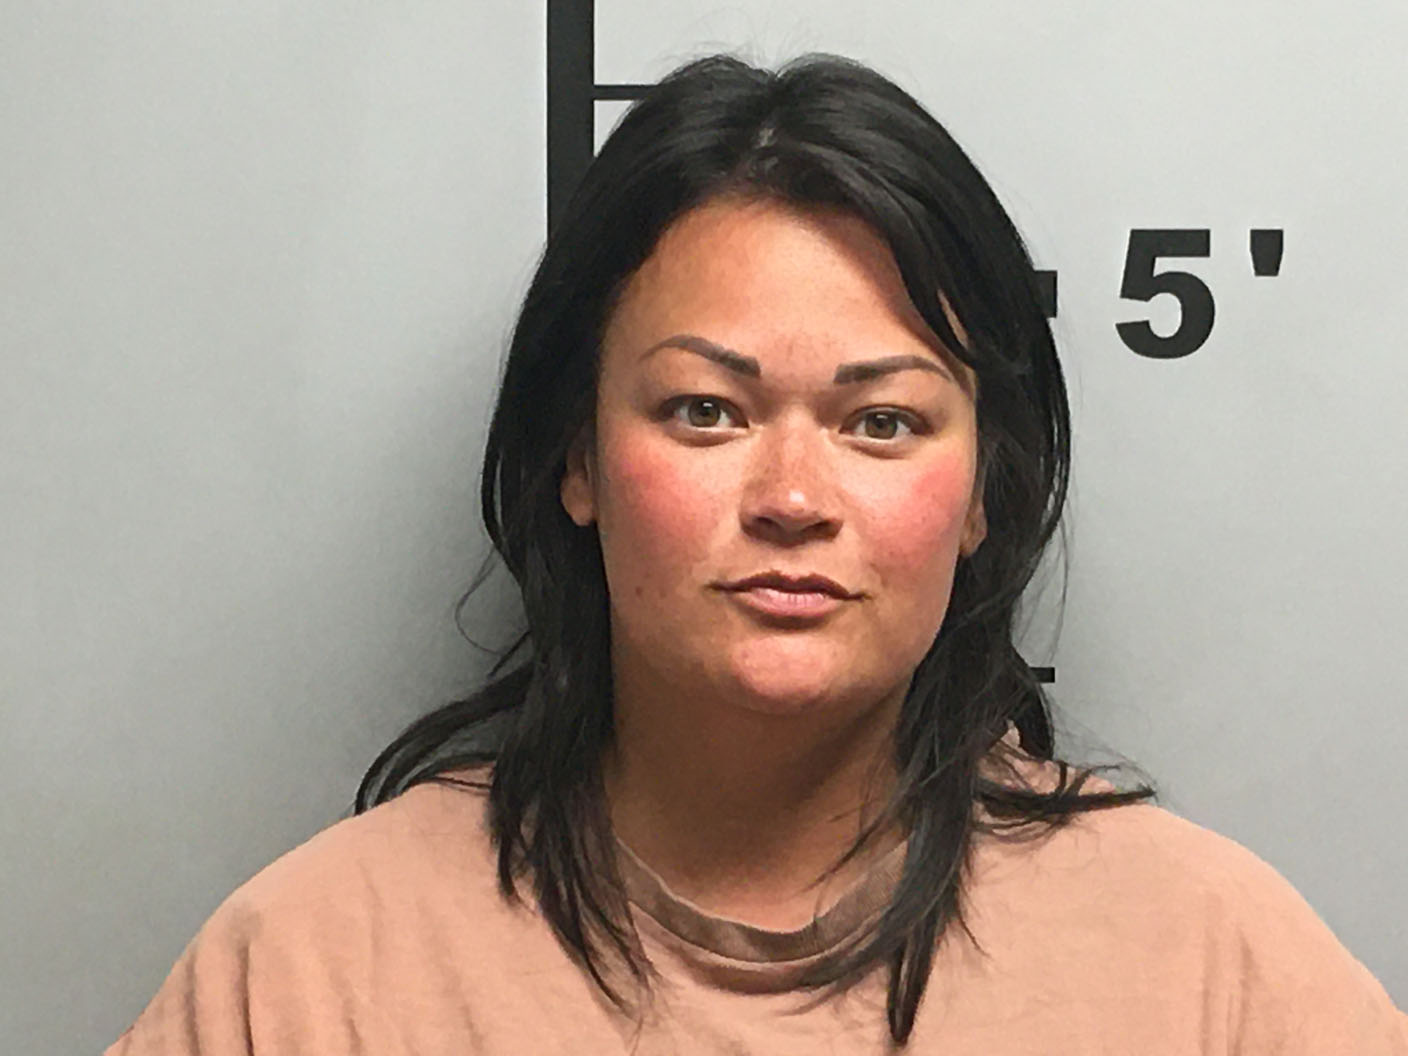 Rogers woman arrested, accused of having sex with 15-year-old pic